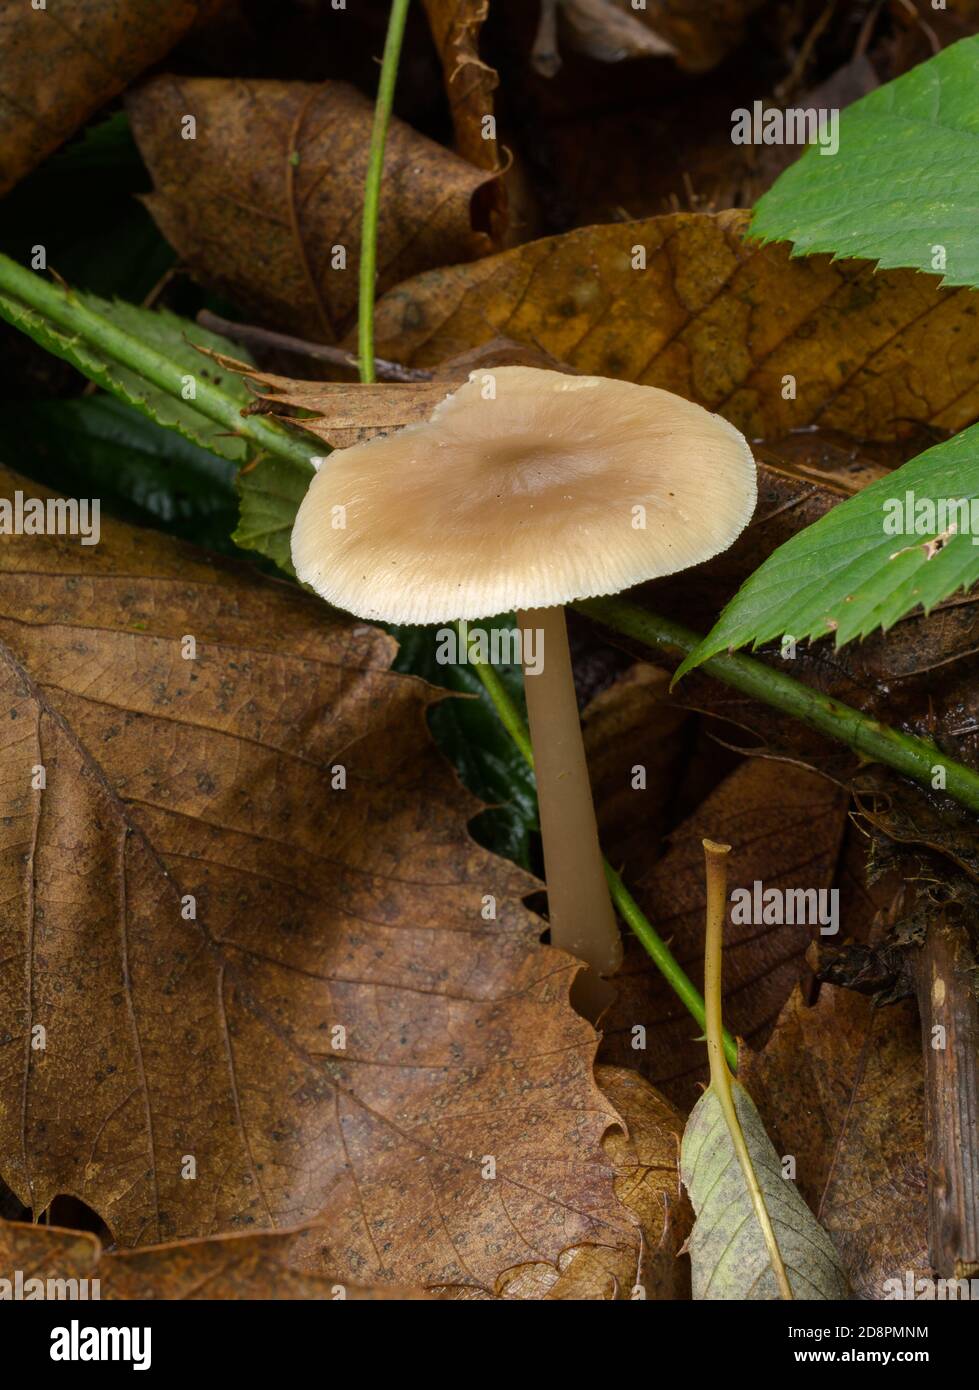 The entoloma strictius mushroom growing alone in damp, fall woodland. Stock Photo